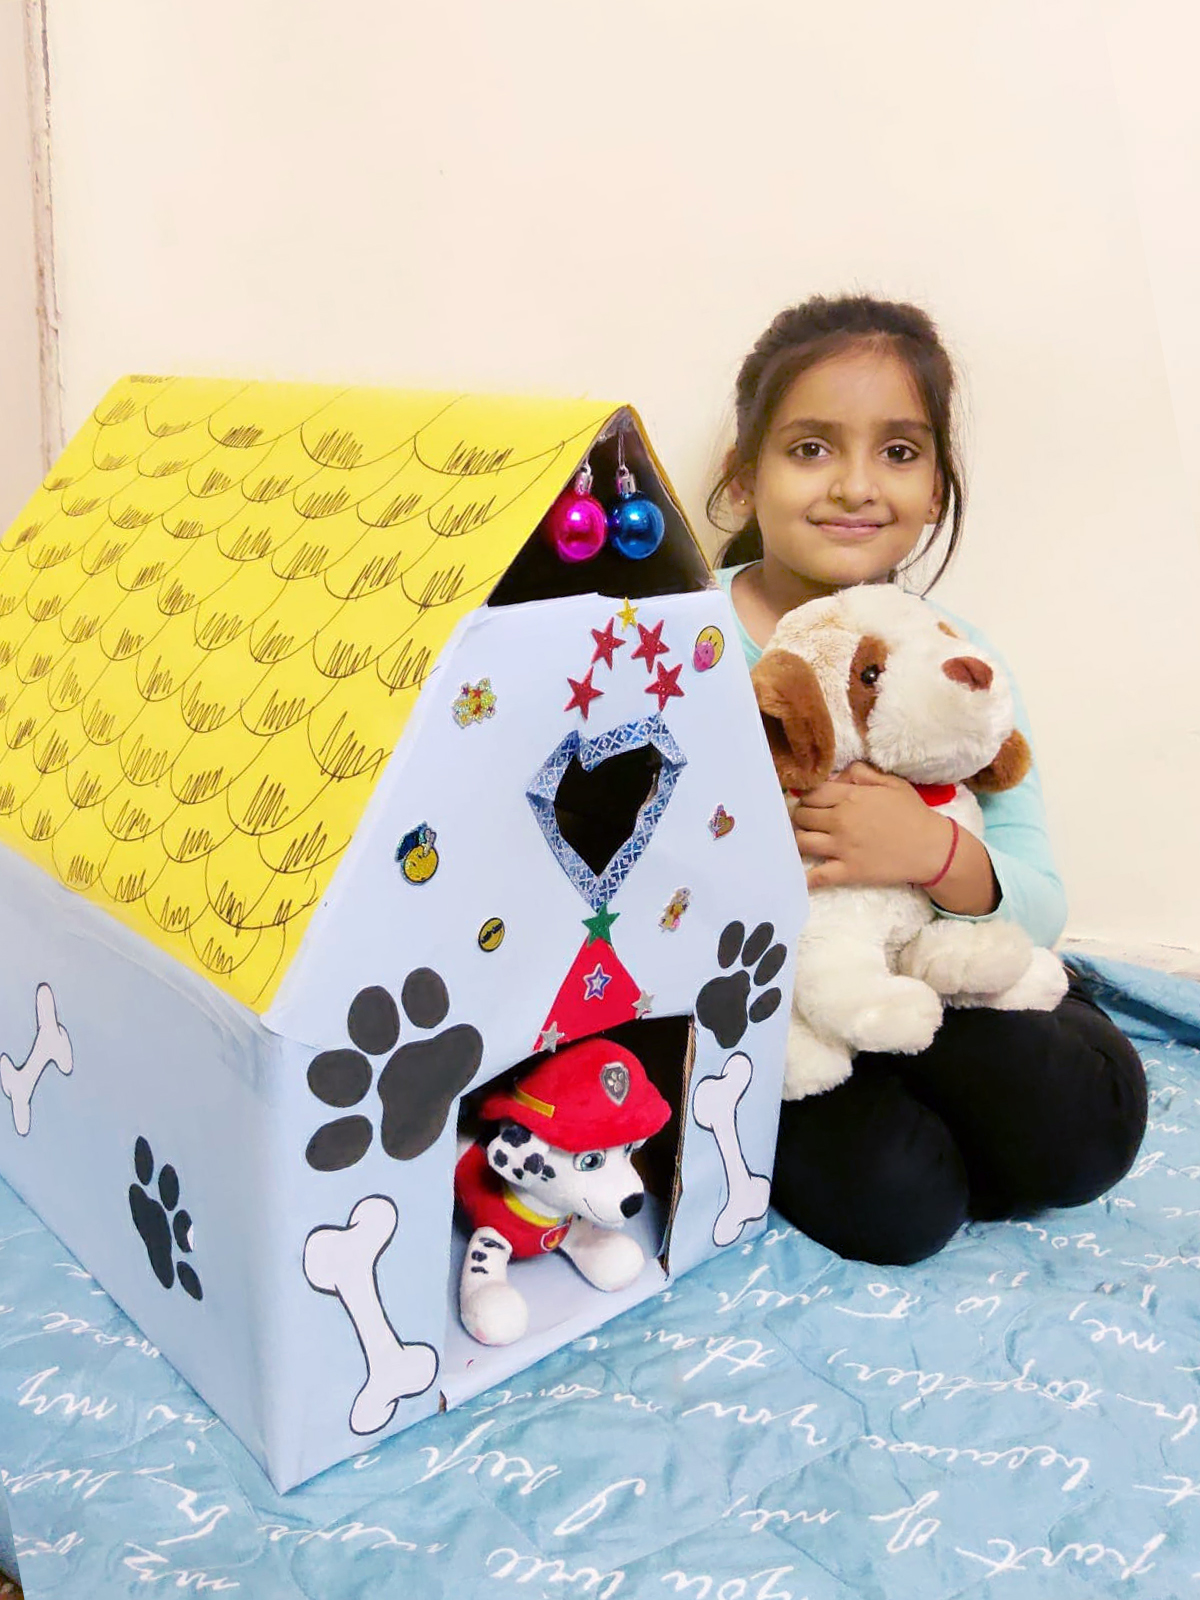 Presidium Dwarka-6, STUDENTS LEARN ABOUT DIFFERENT TYPES OF ANIMAL HOMES